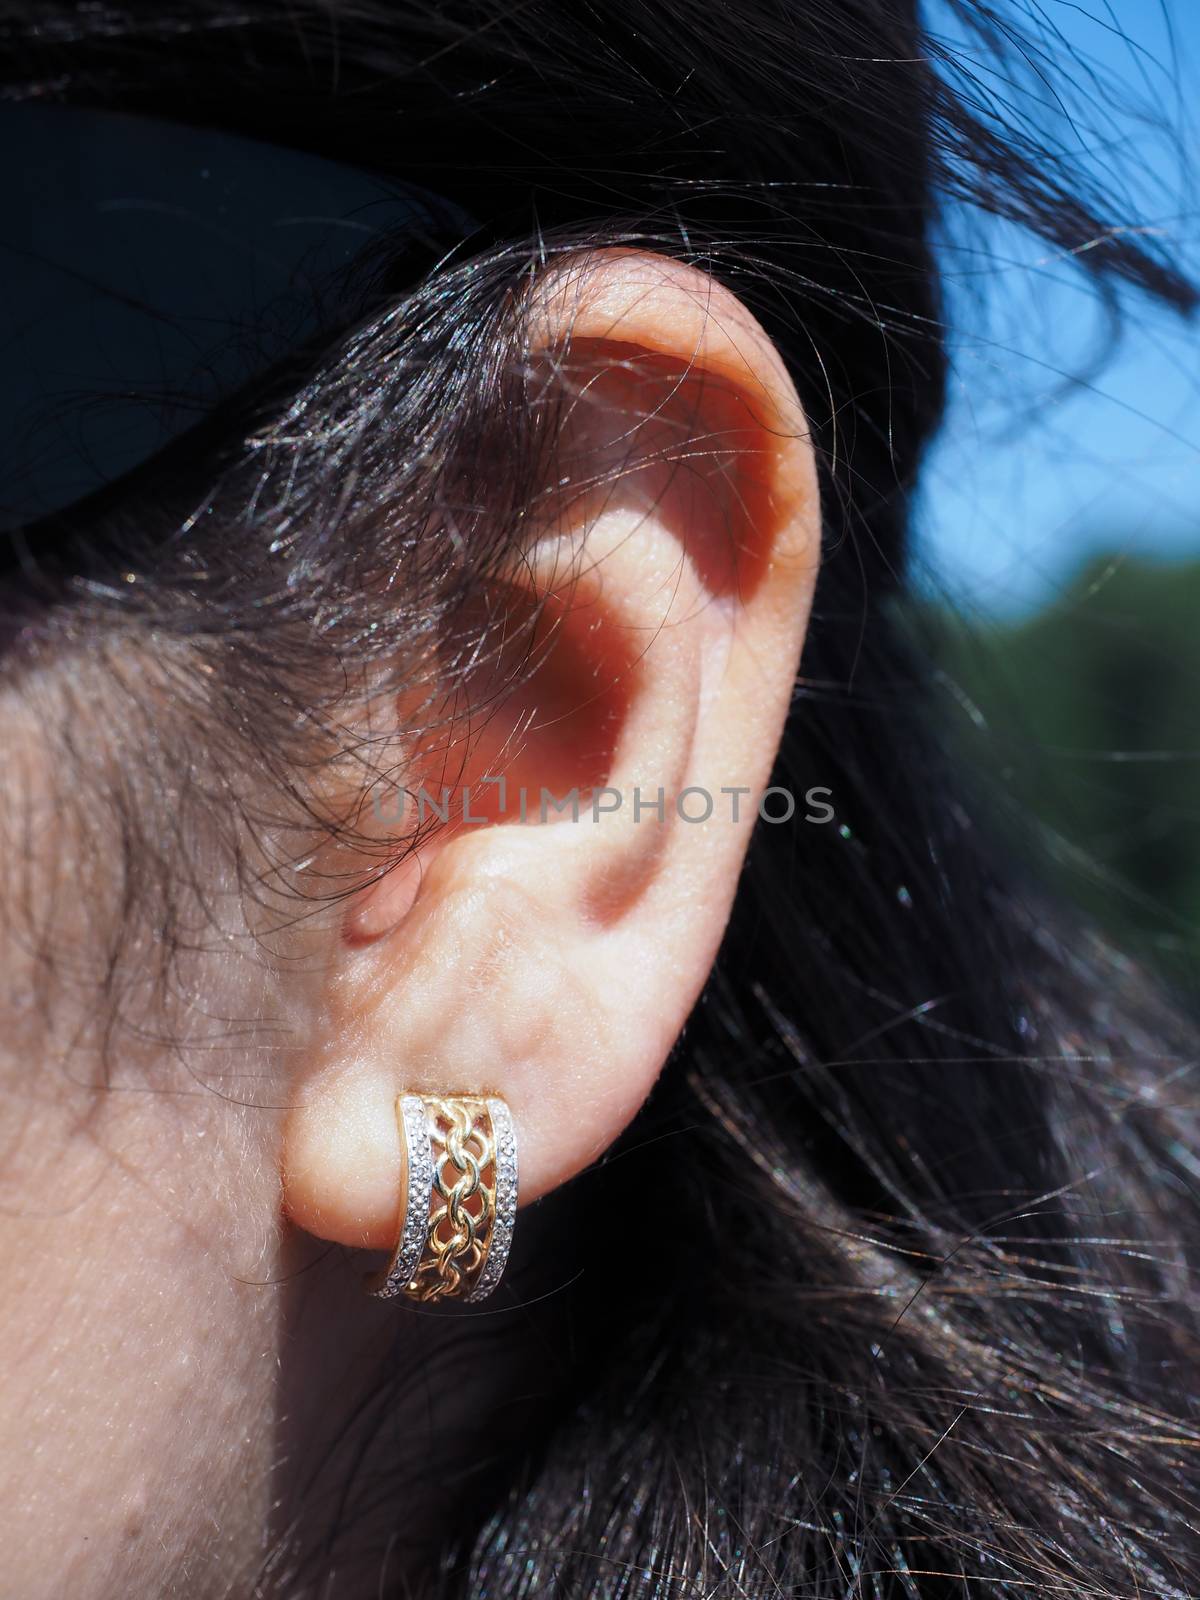 Earring with gold and diamonds at closeup in ear of a brunette